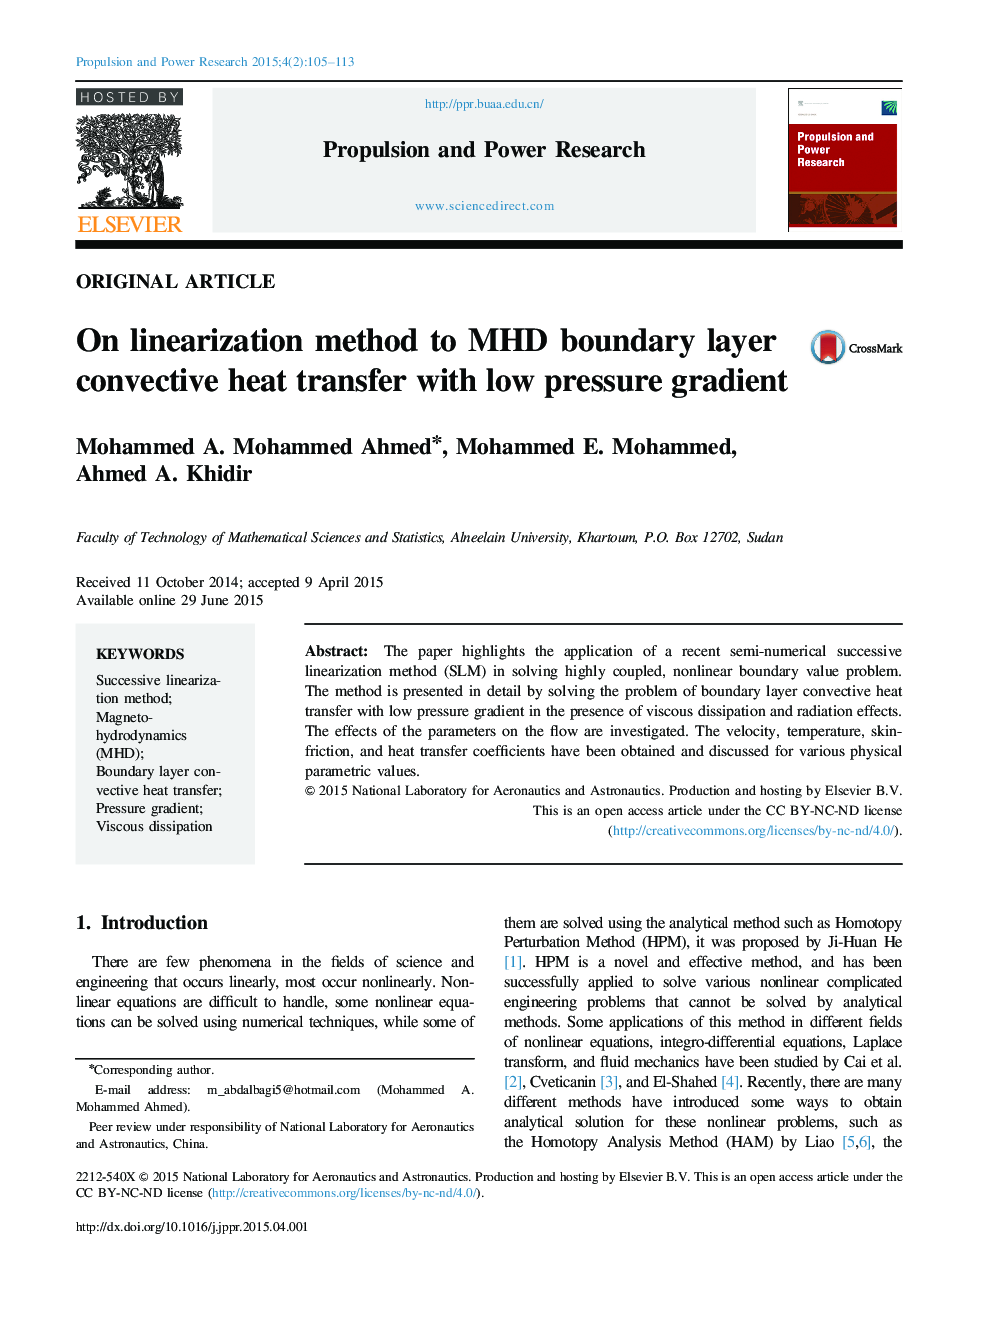 On linearization method to MHD boundary layer convective heat transfer with low pressure gradient 